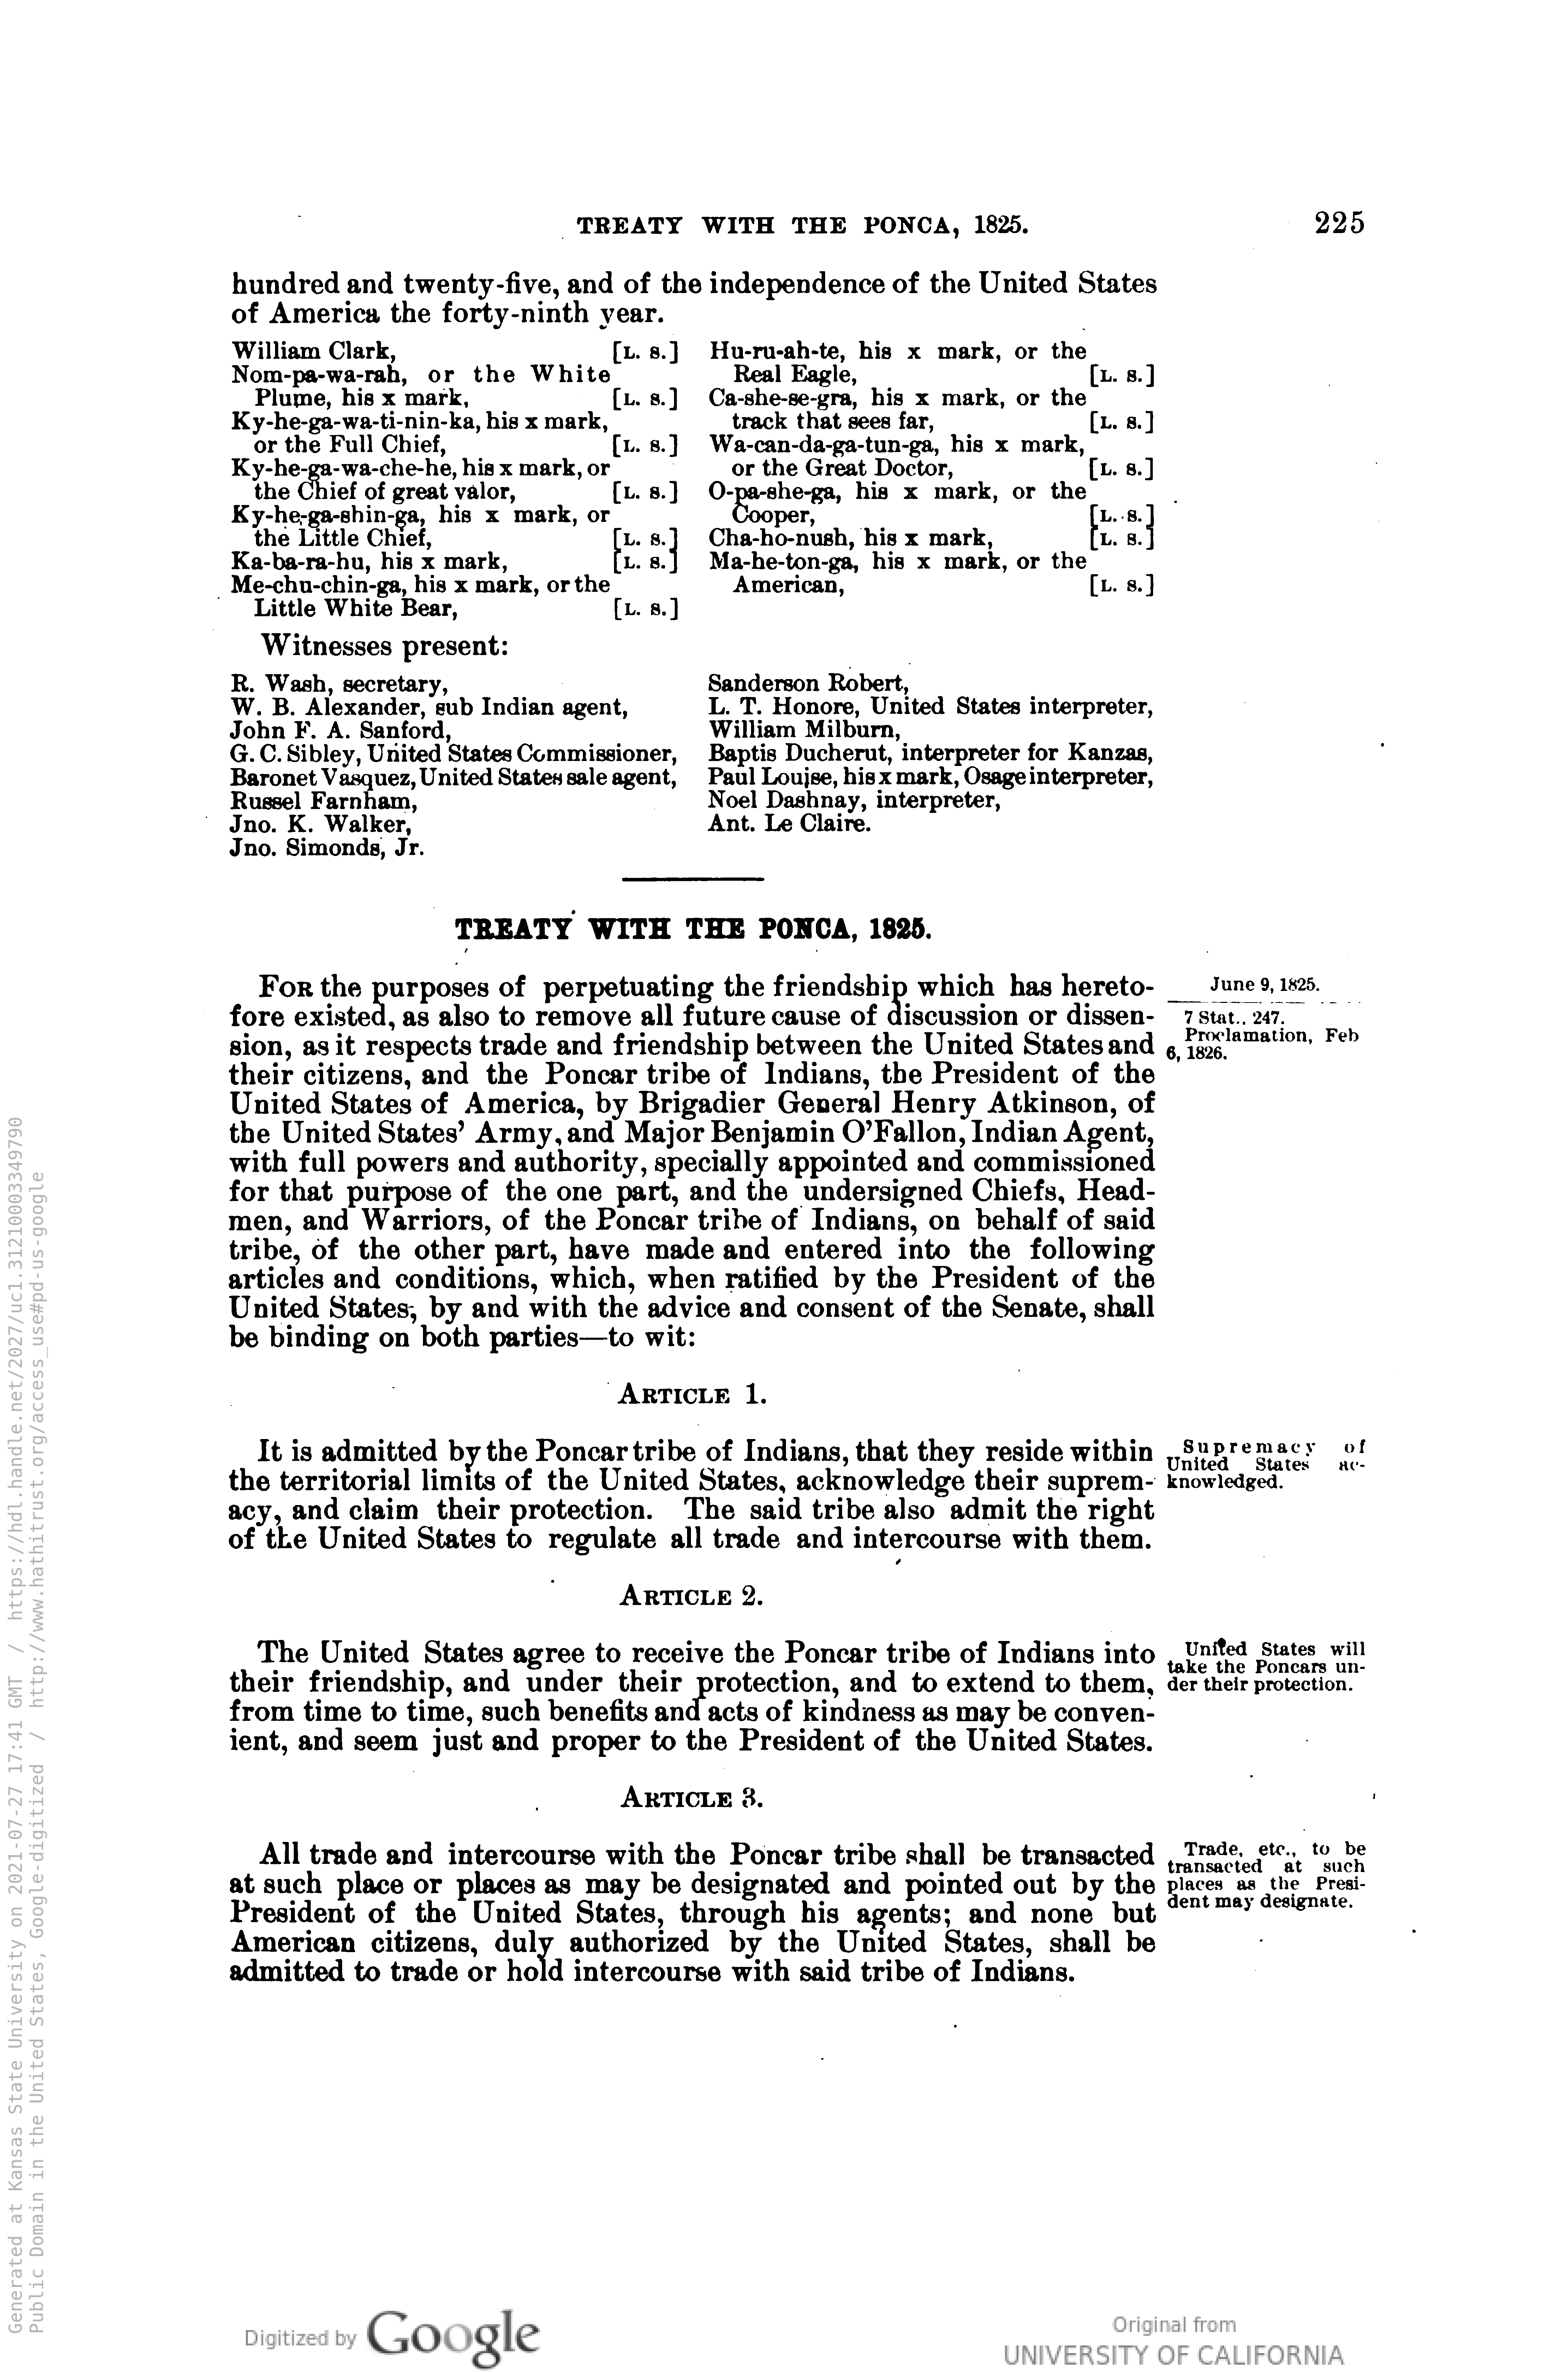 Treaty of 1825, Page 4